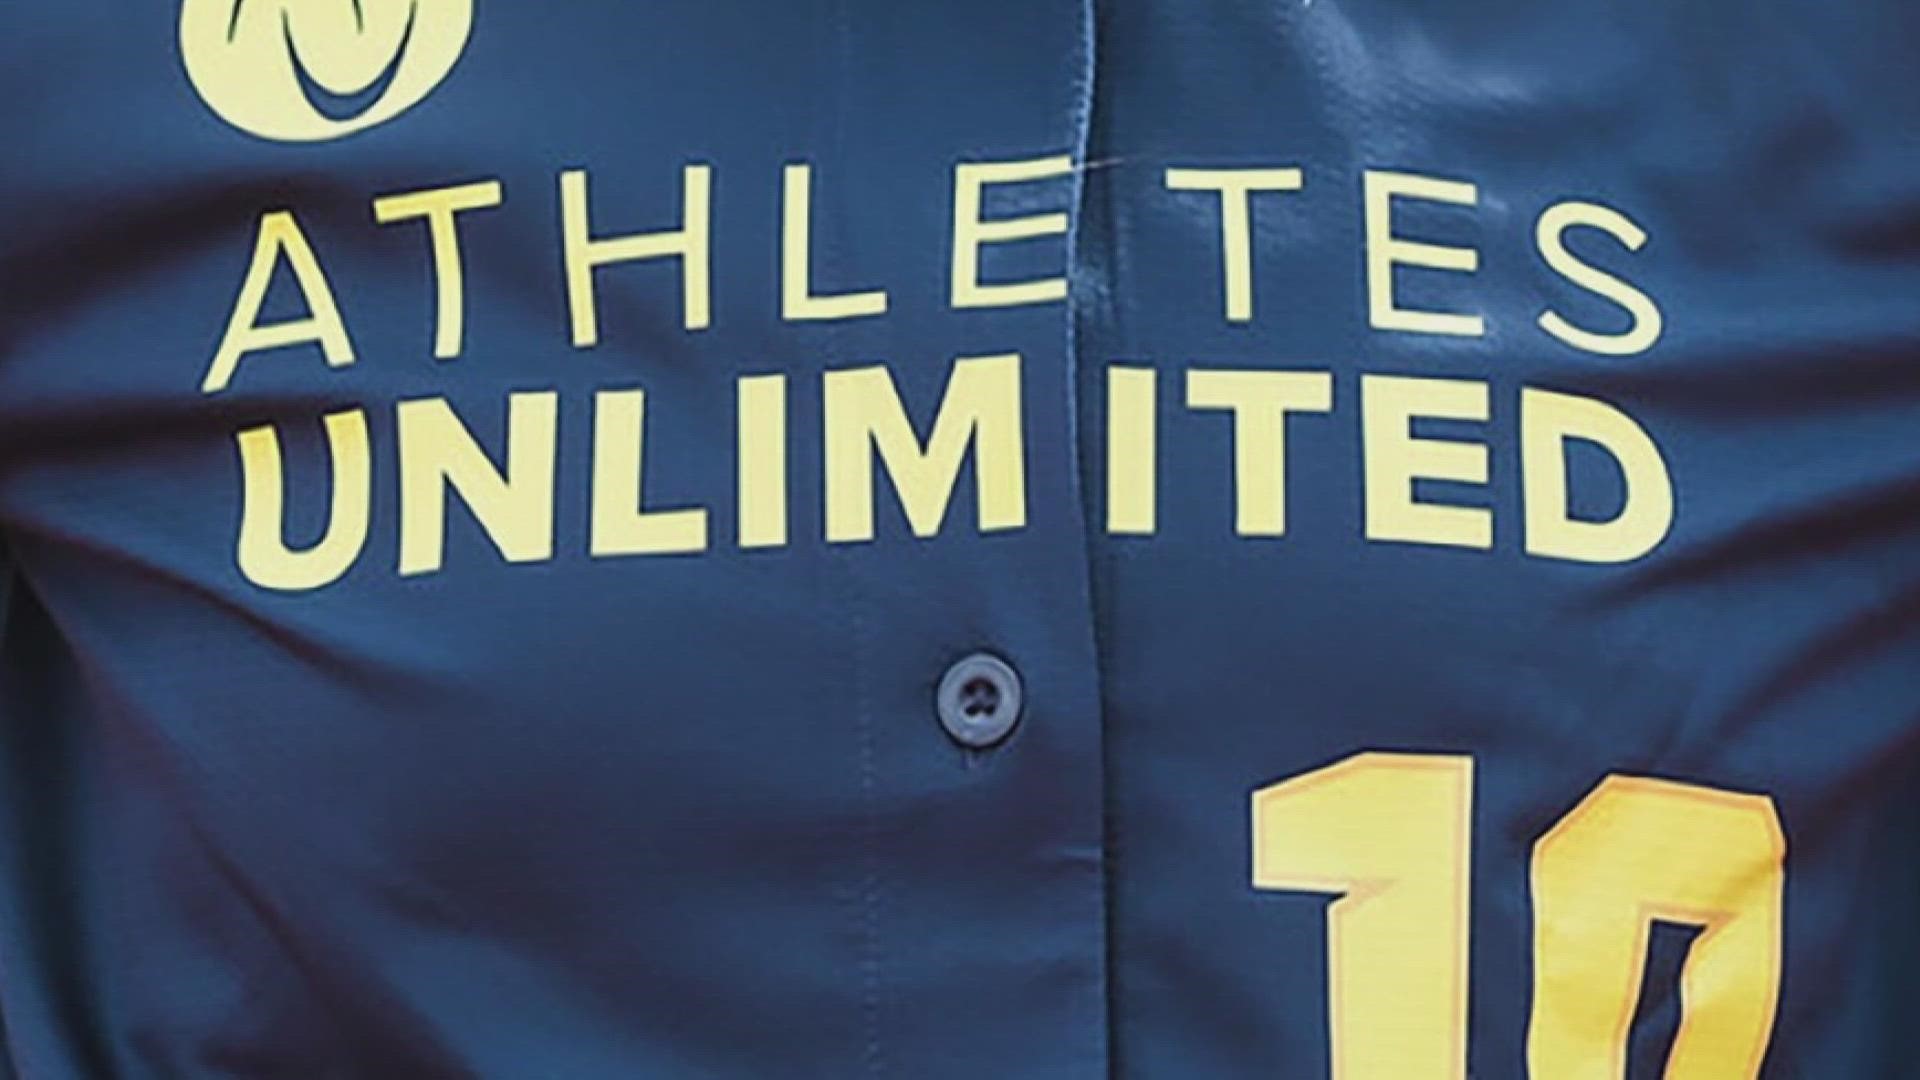 There is a new professional league coming to San Diego and its called Athletes Unlimited.